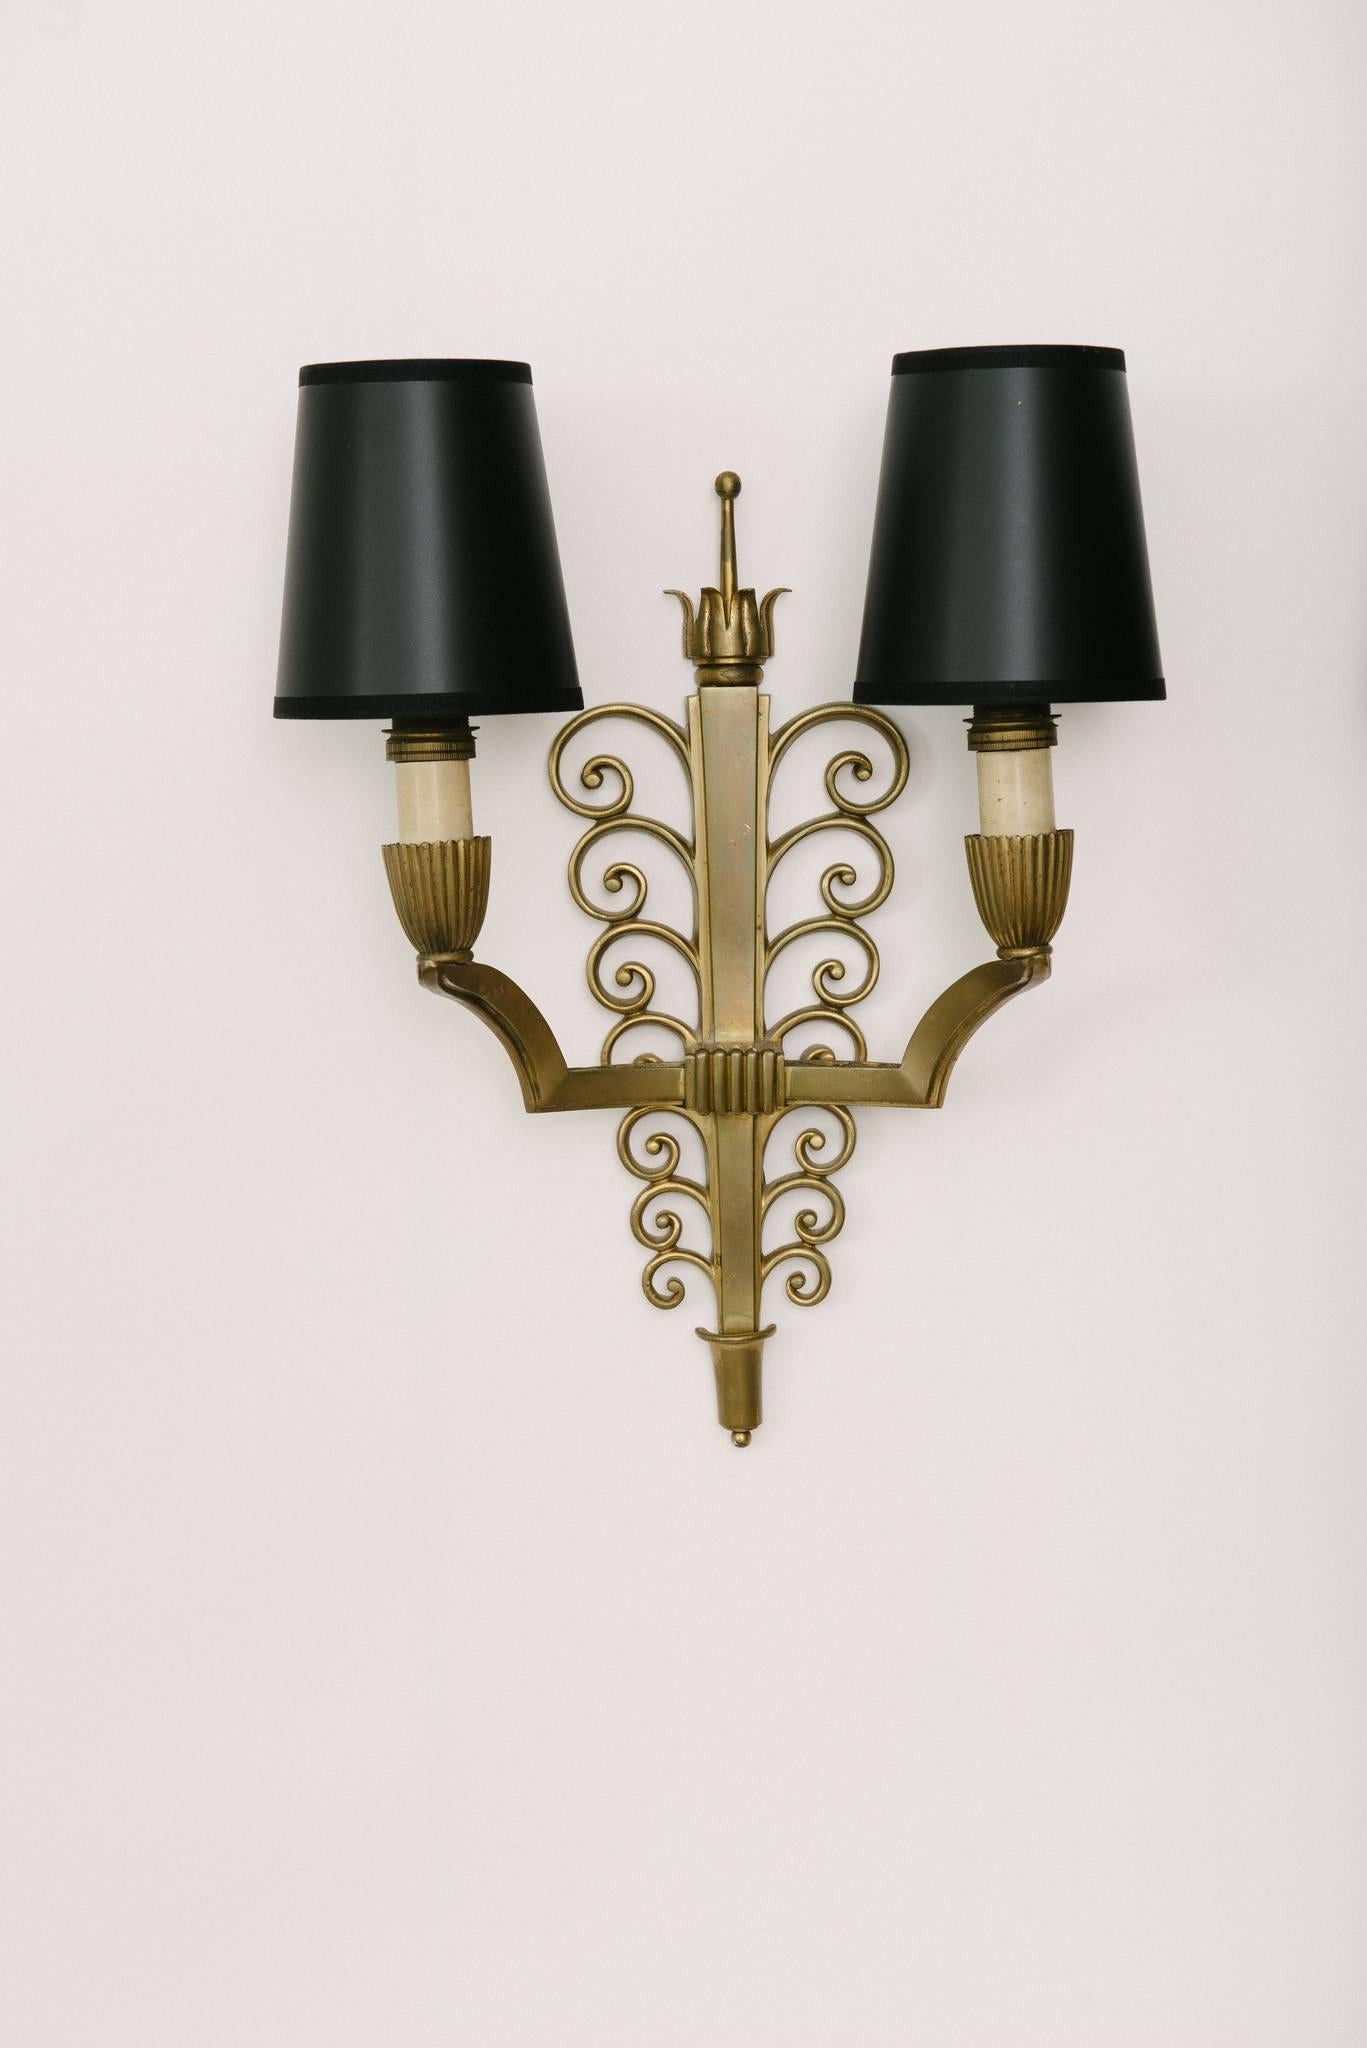 Pair of French 1940s bronze Poillerat wall sconces, newly wired with black paper shades.

